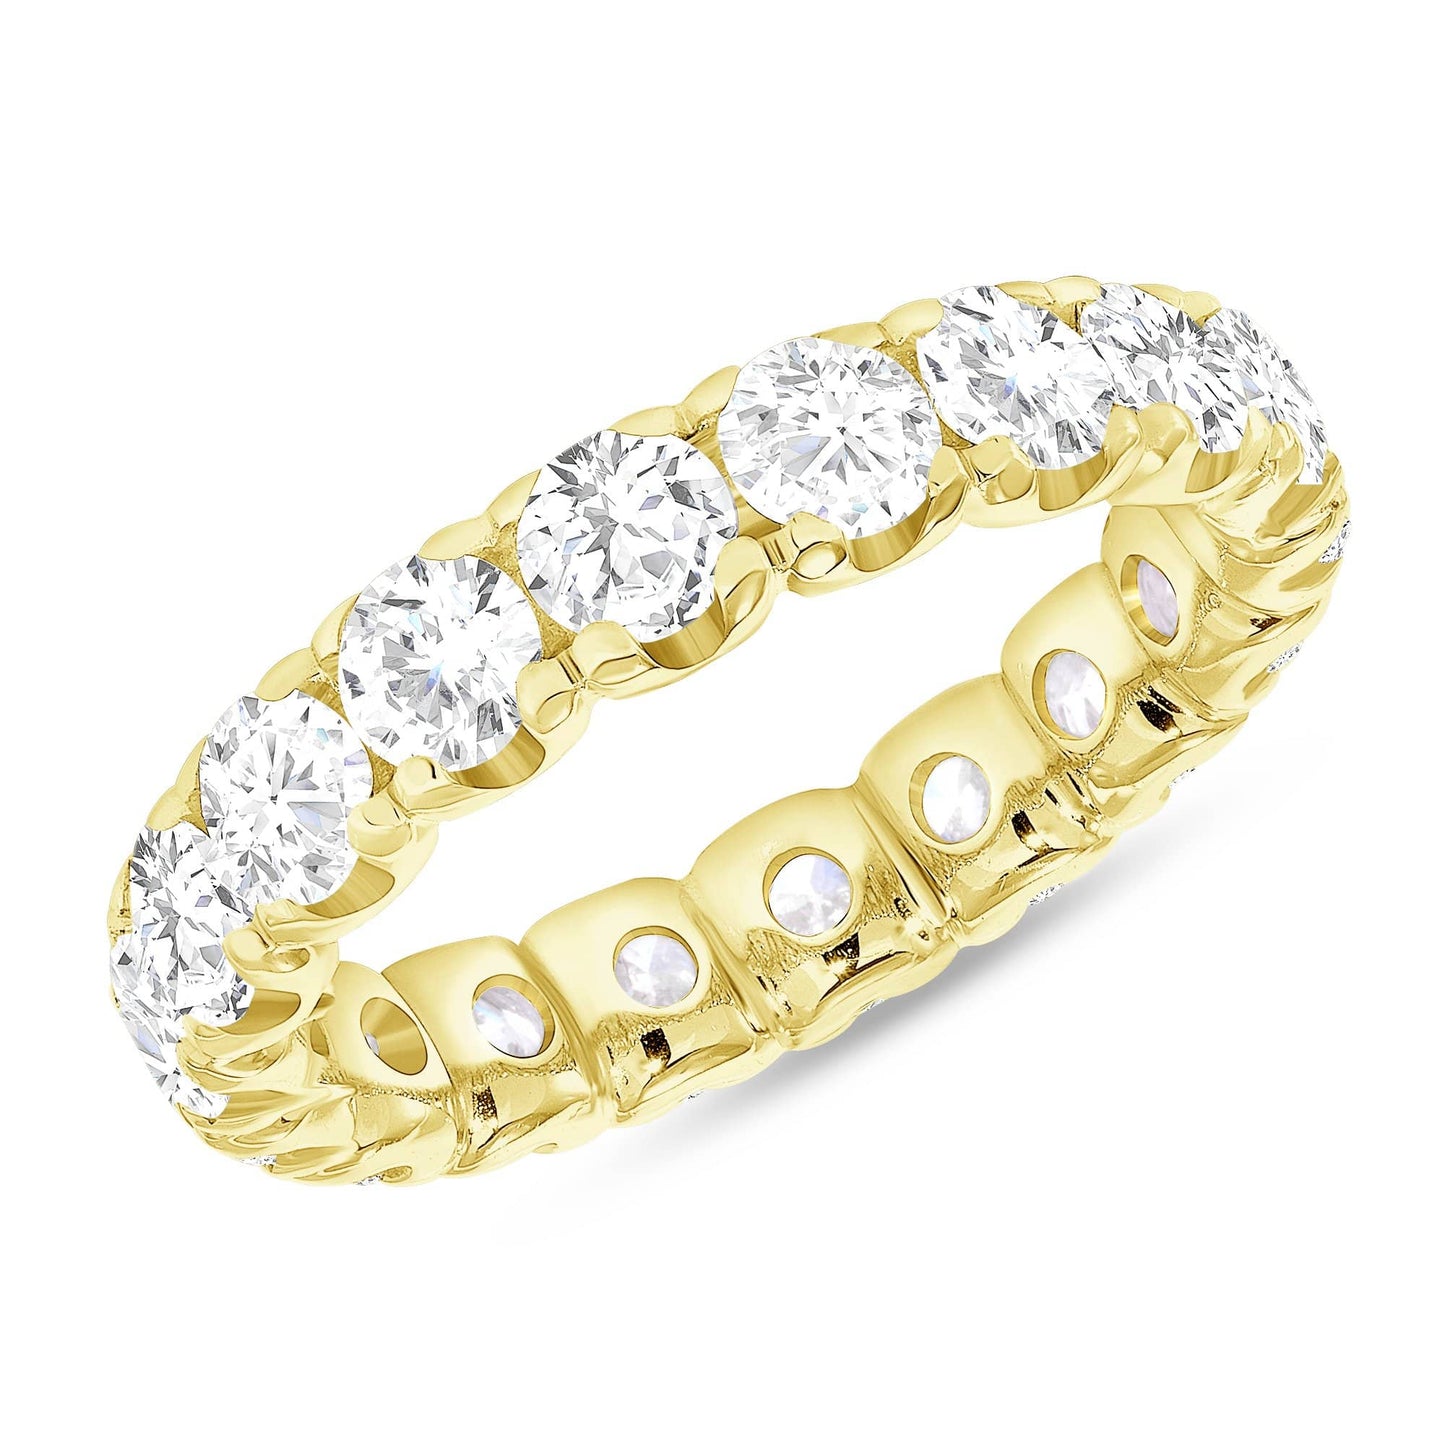 Shop Yellow Gold Wedding Bands – Page 2 – Happy Jewelers